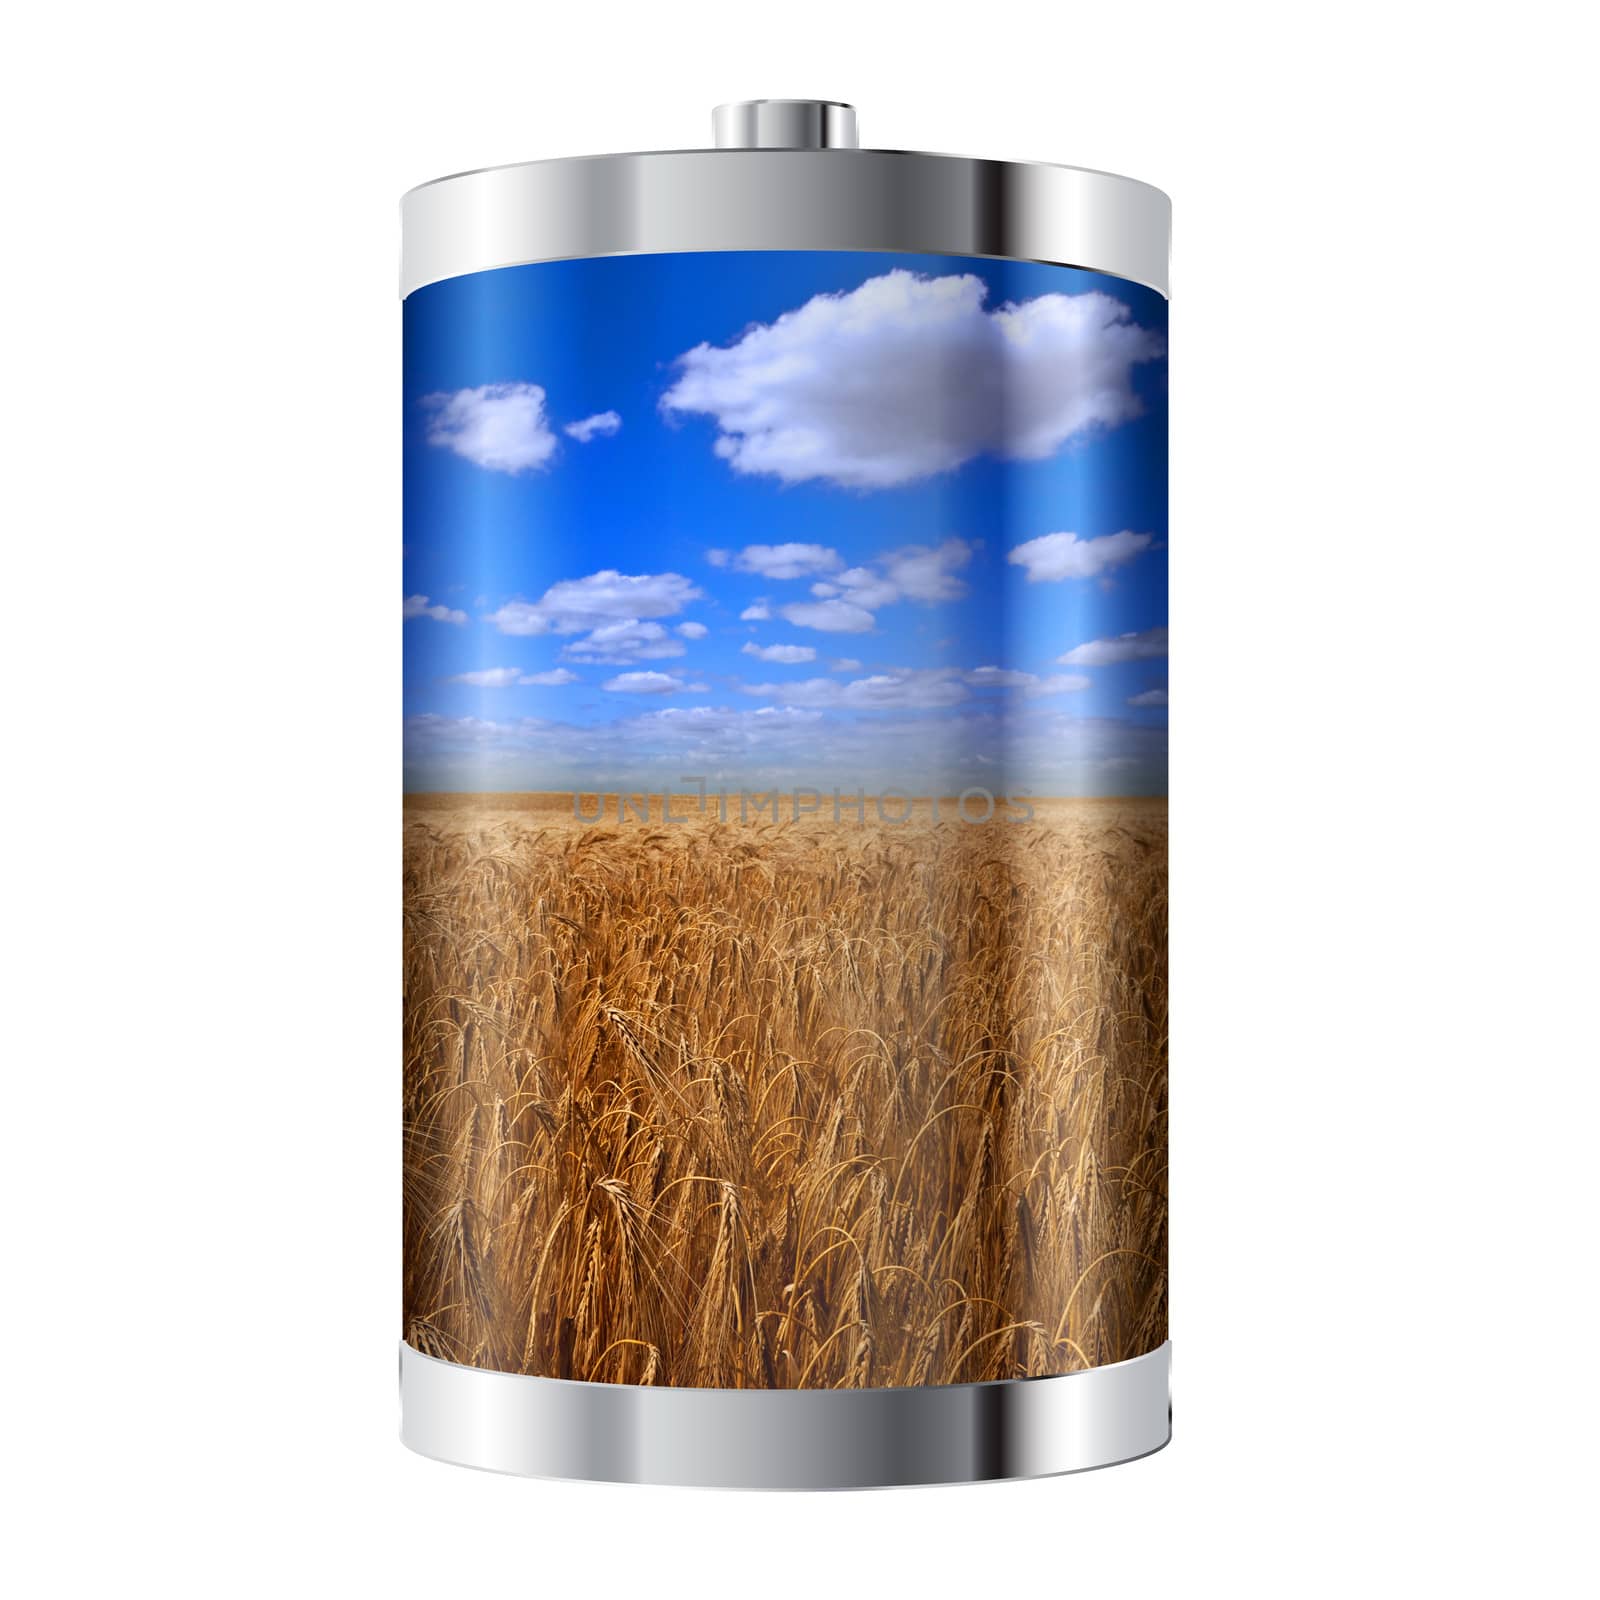 Battery cell containing ripe field of wheat 
